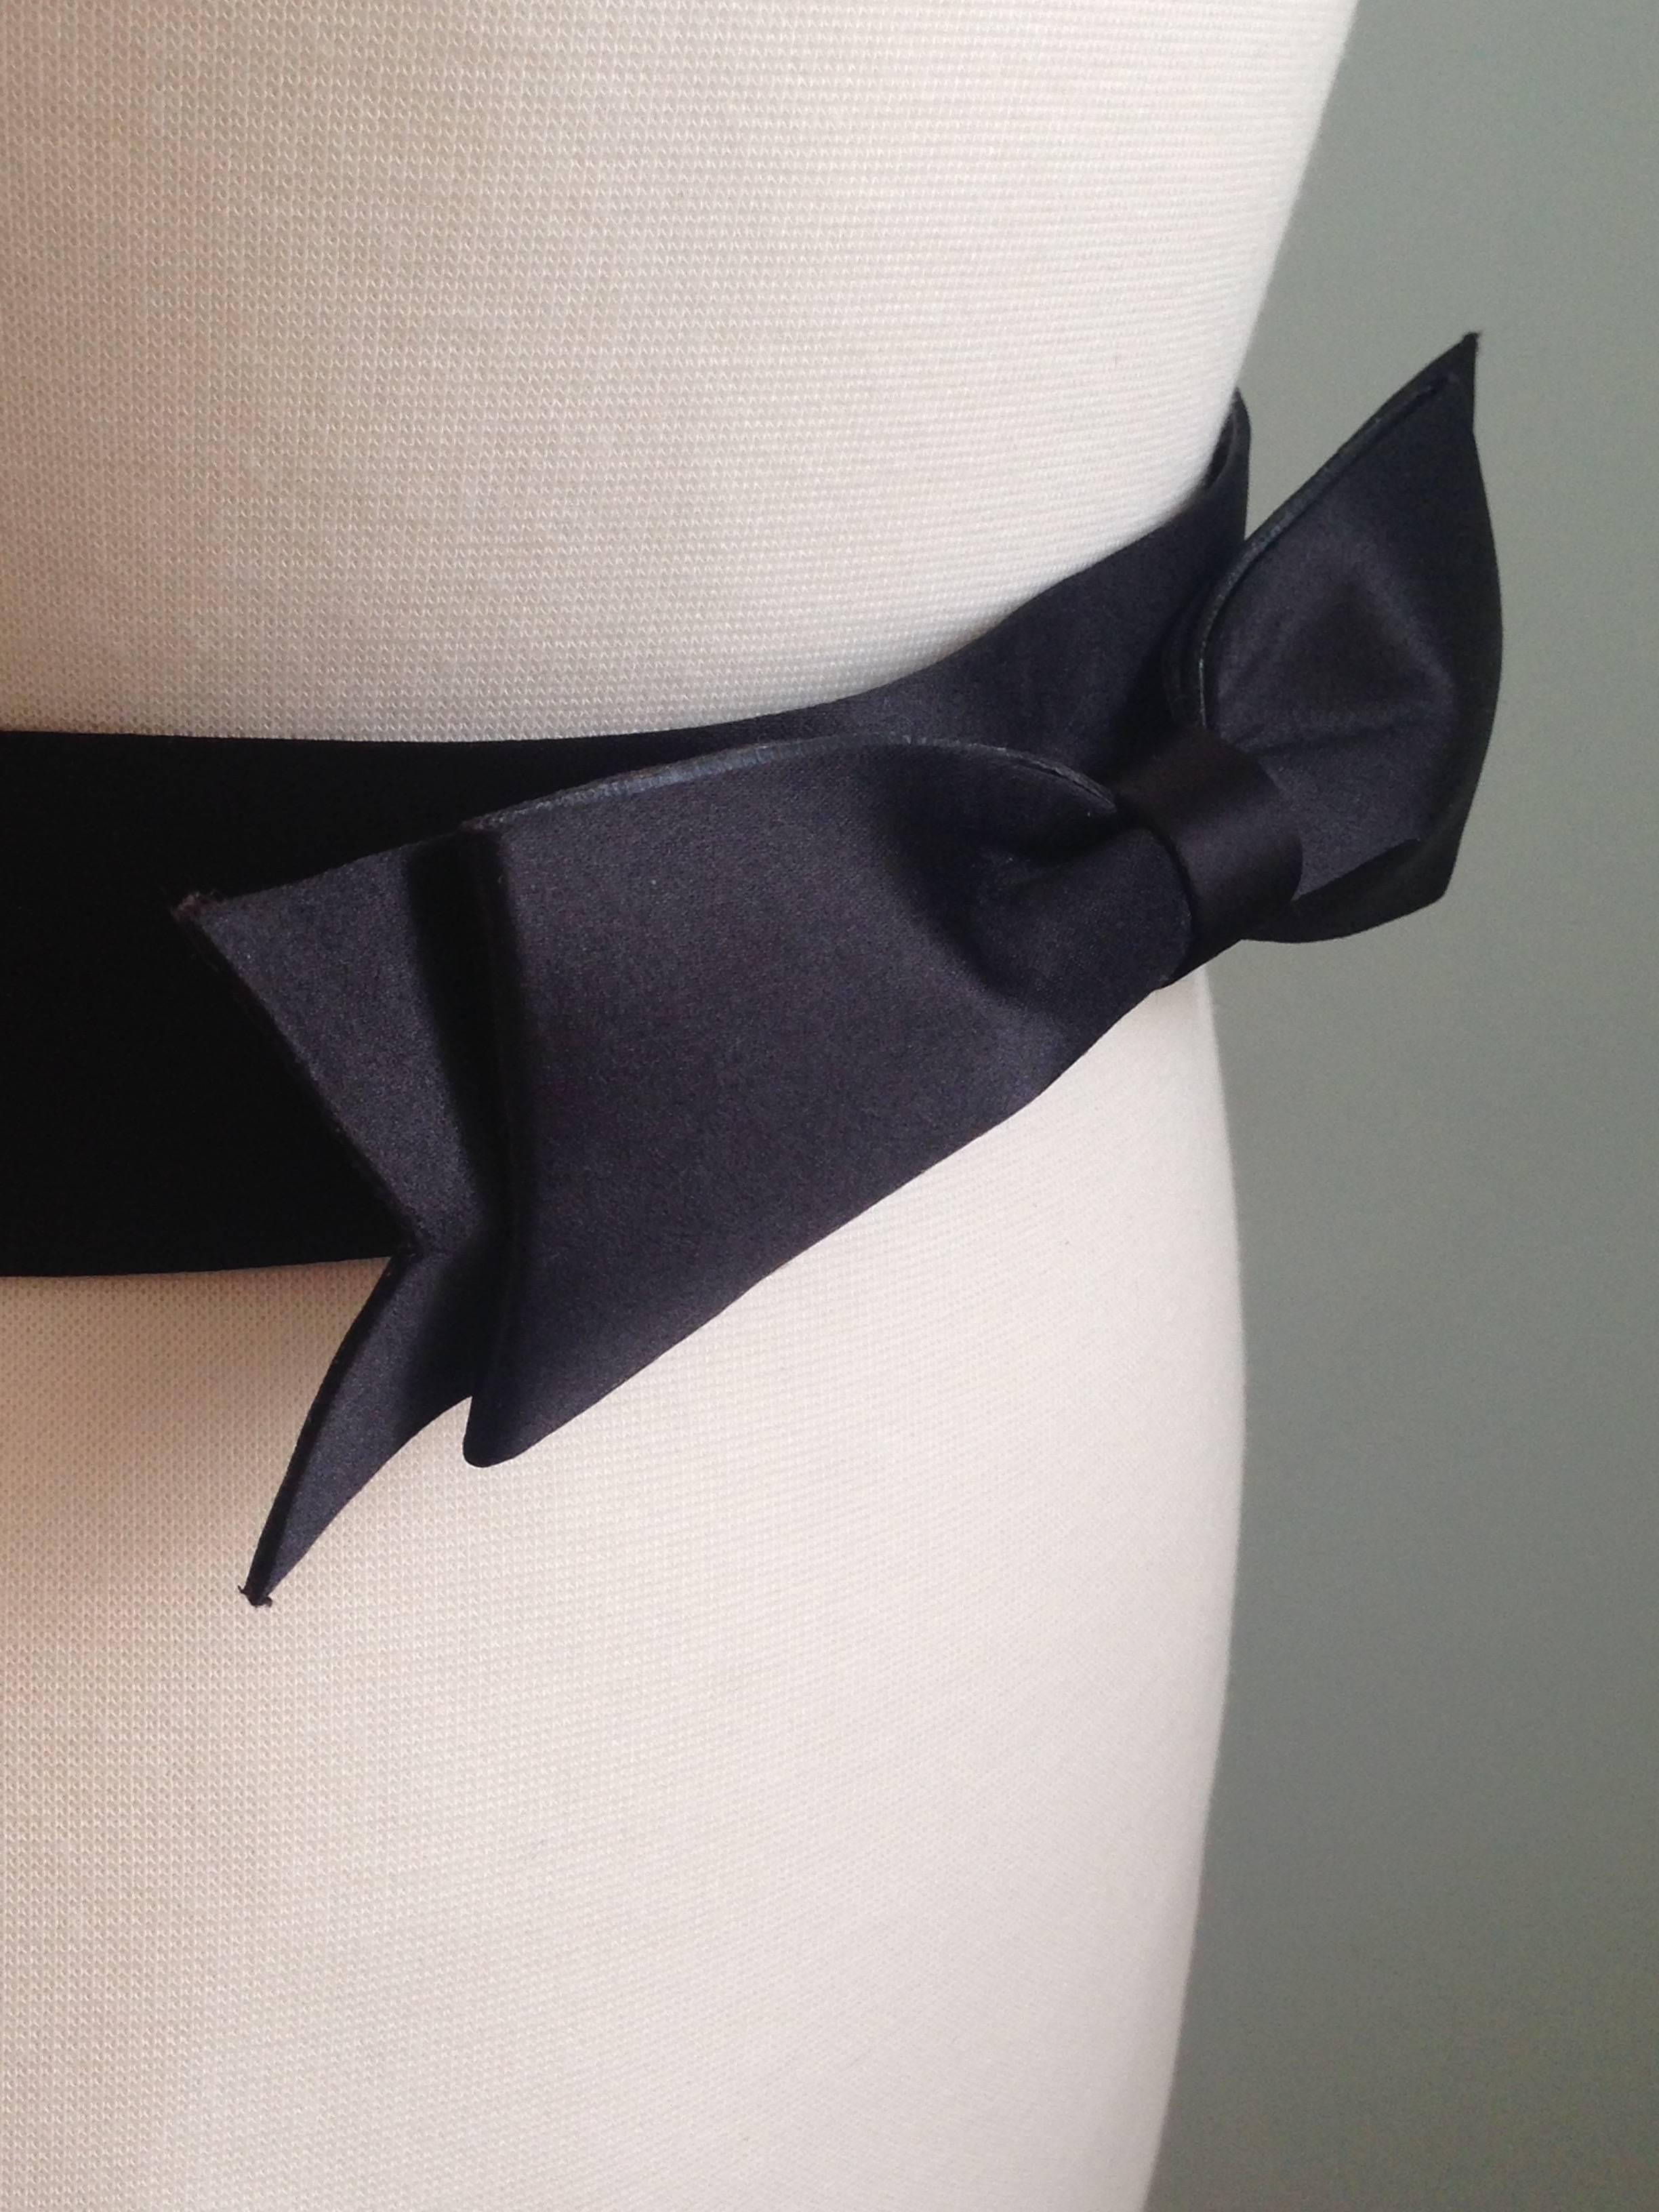 This is a black satin and leather Chanel bow belt from 1995. It is a size large or extra large. It is marked size: 34/85 and fits a waist size 31